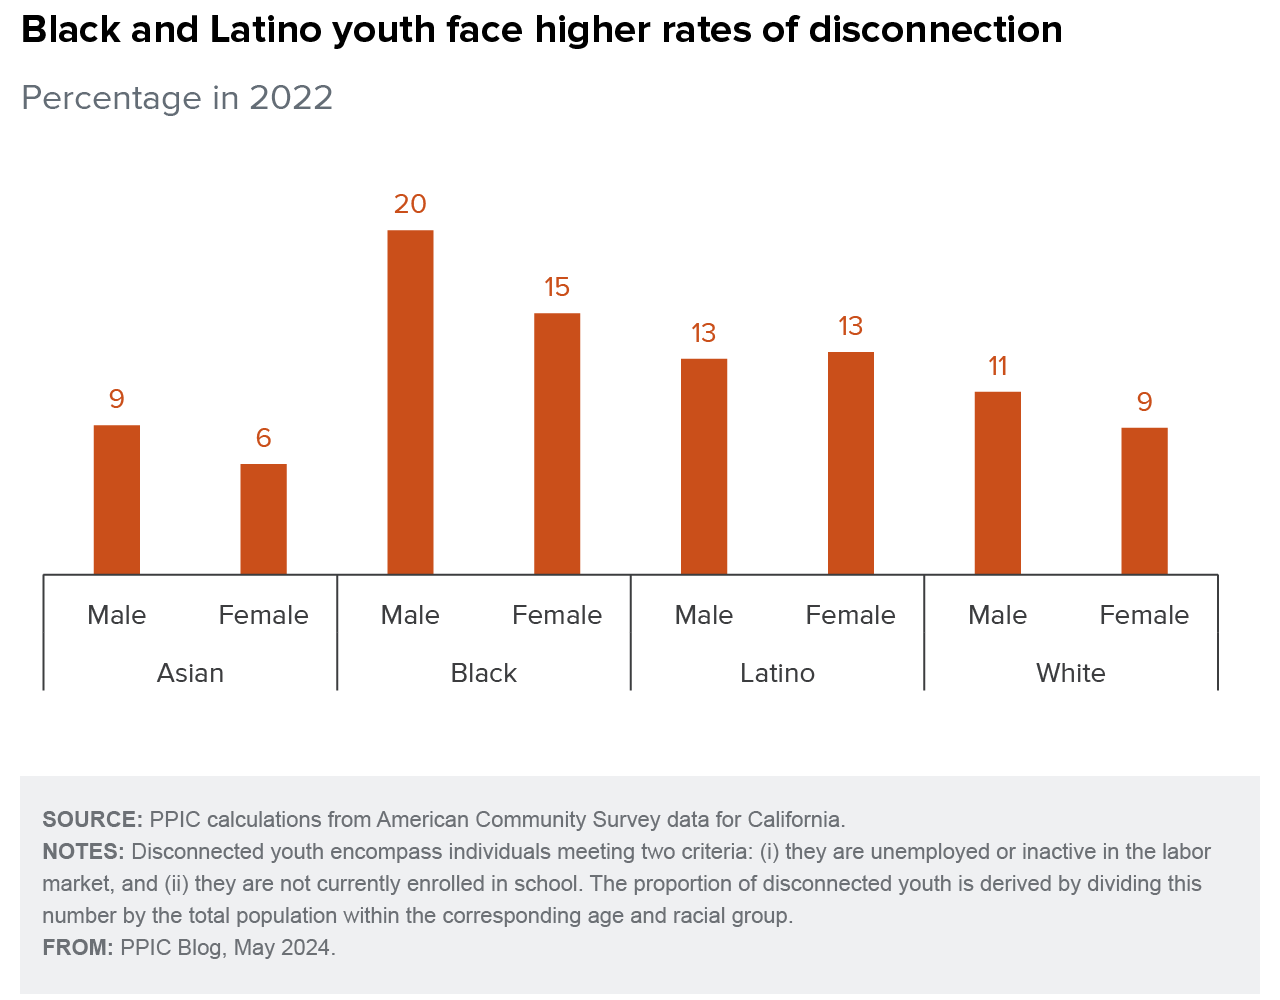 figure - Black and Latino youth face higher rates of disconnection